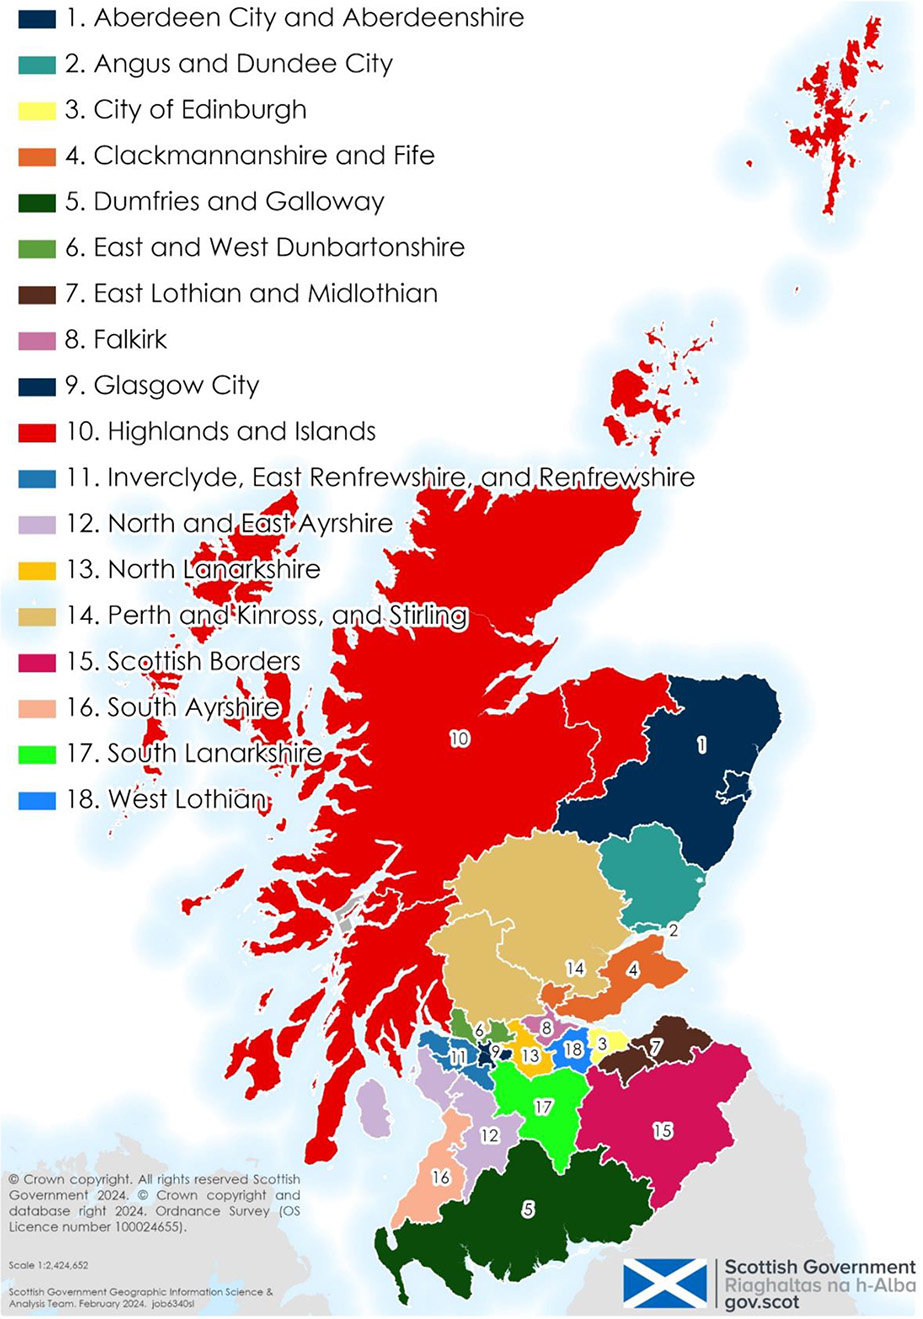 A map of Scotland showing the 18 proposed ITL3 regions.